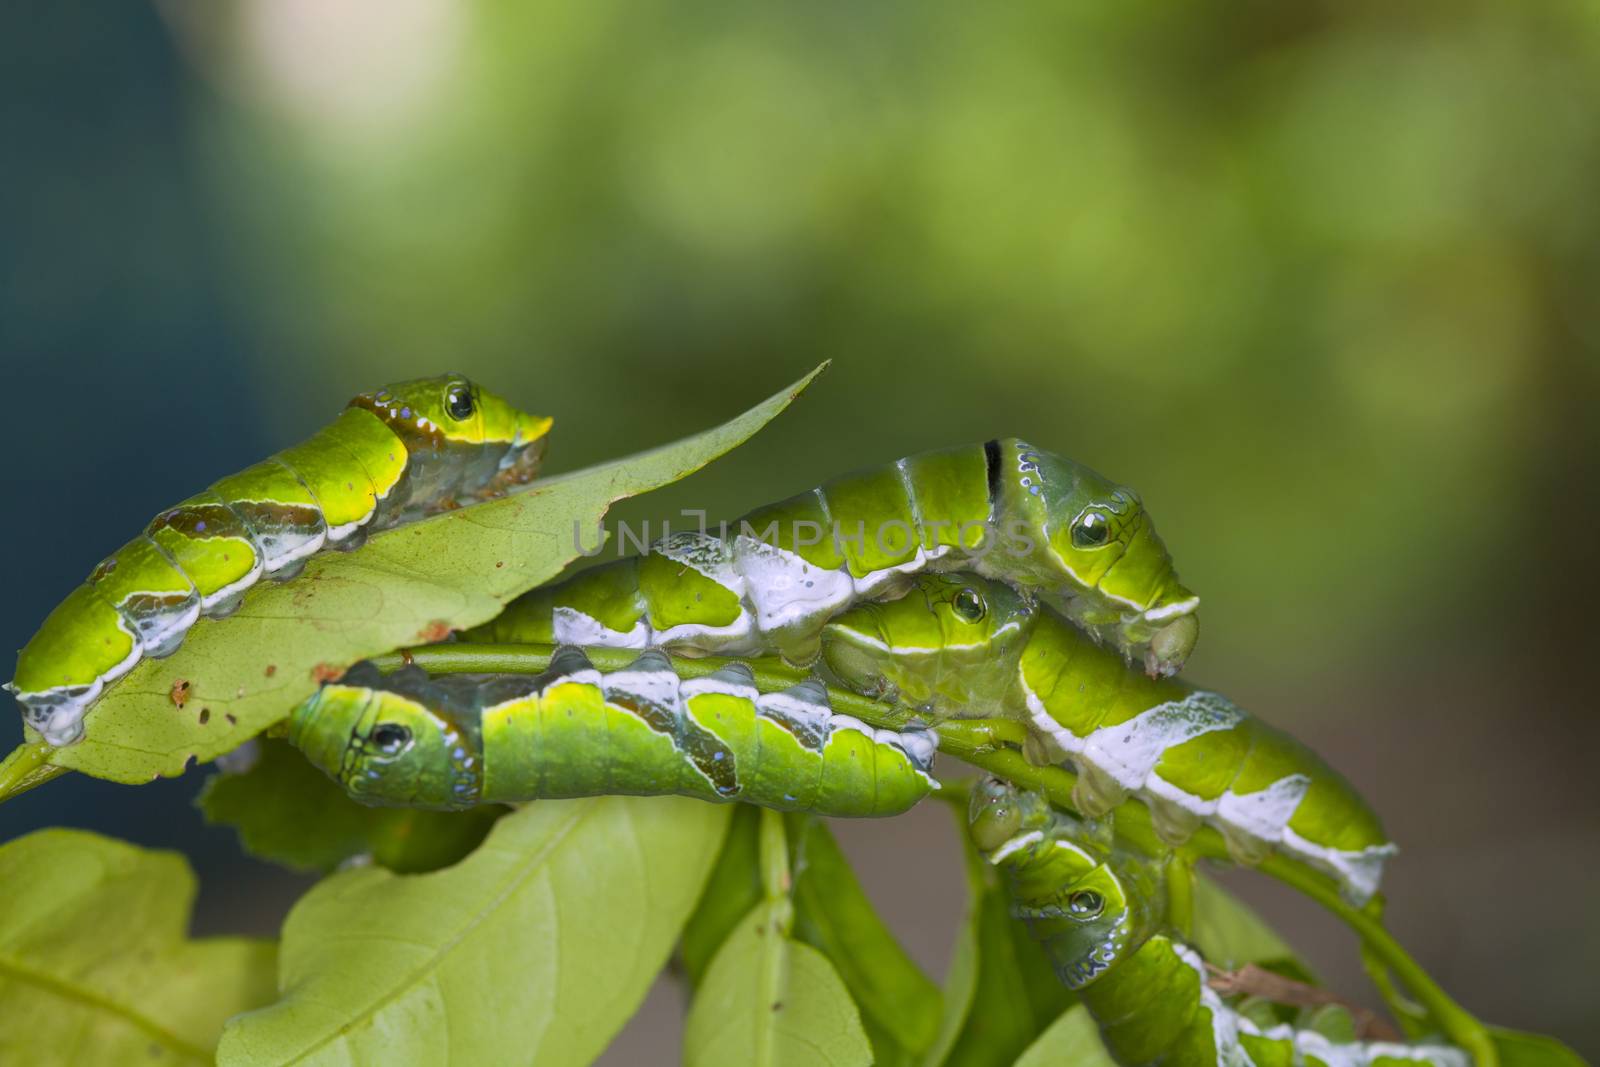 A group of Moth Caterpillars on leaf. Agriculture pest caterpillar icon. Macro of caterpillars on nature background.